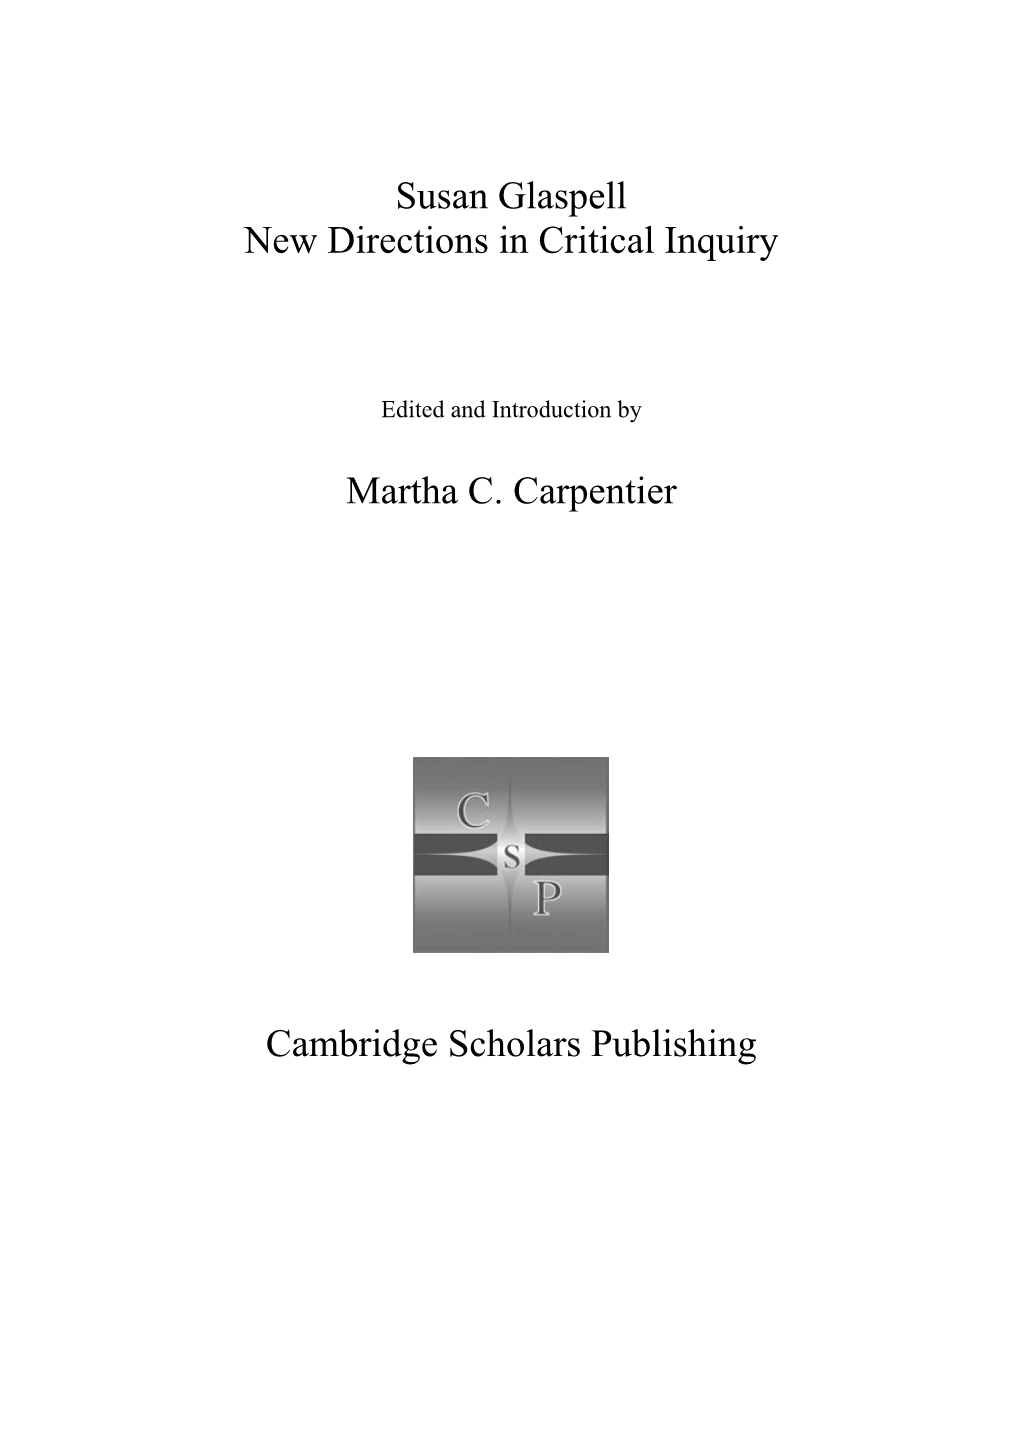 Susan Glaspell New Directions in Critical Inquiry Martha C. Carpentier